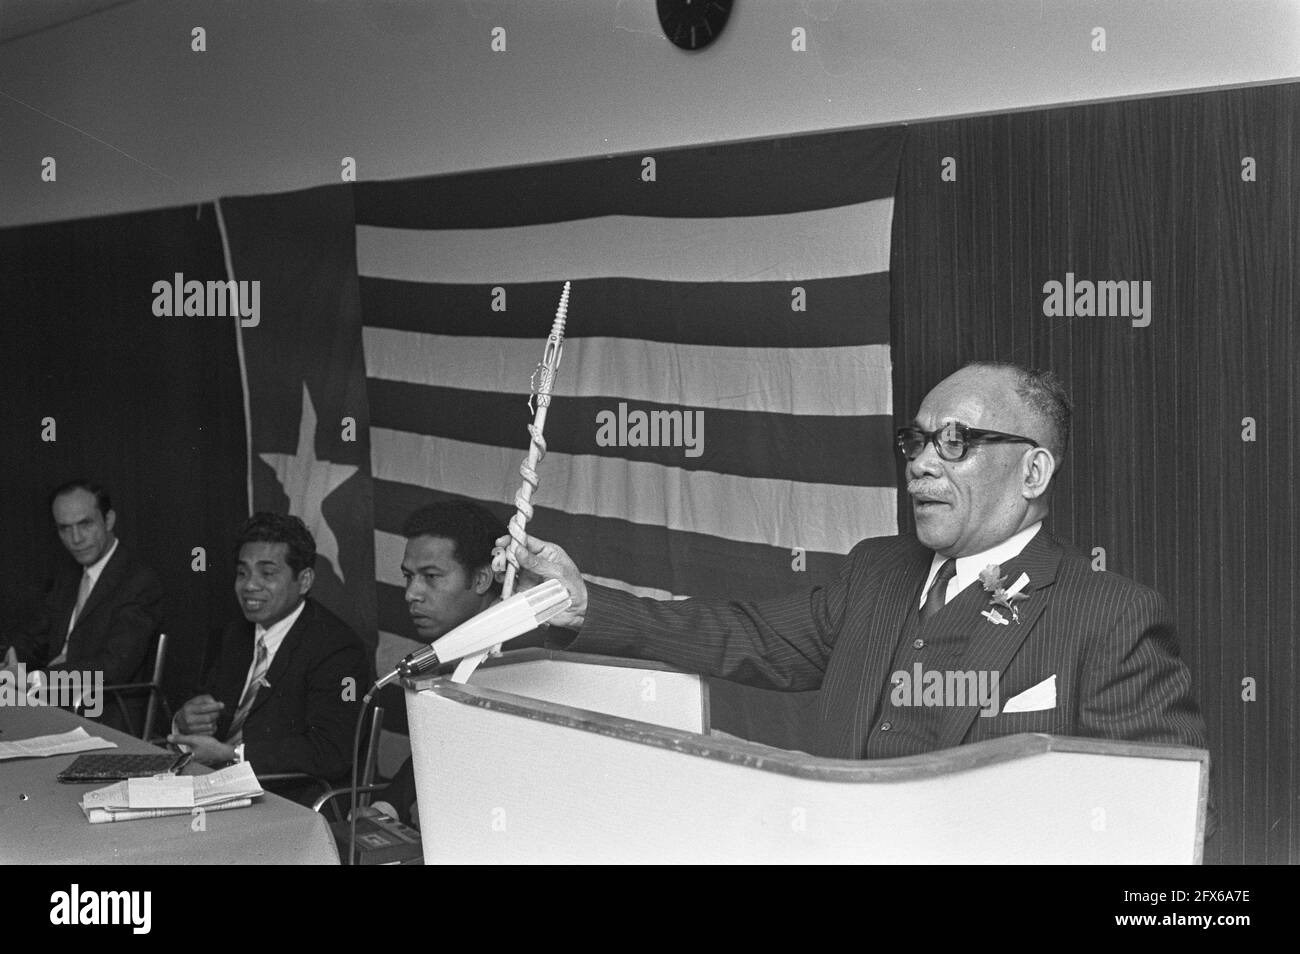 Commemorative meeting Papuans in The Hague, speech by M. W. Kasiepo, president of West Papua/Melanesia, December 1, 1972, meetings, commemorations, presidents, speeches, The Netherlands, 20th century press agency photo, news to remember, documentary, historic photography 1945-1990, visual stories, human history of the Twentieth Century, capturing moments in time Stock Photo